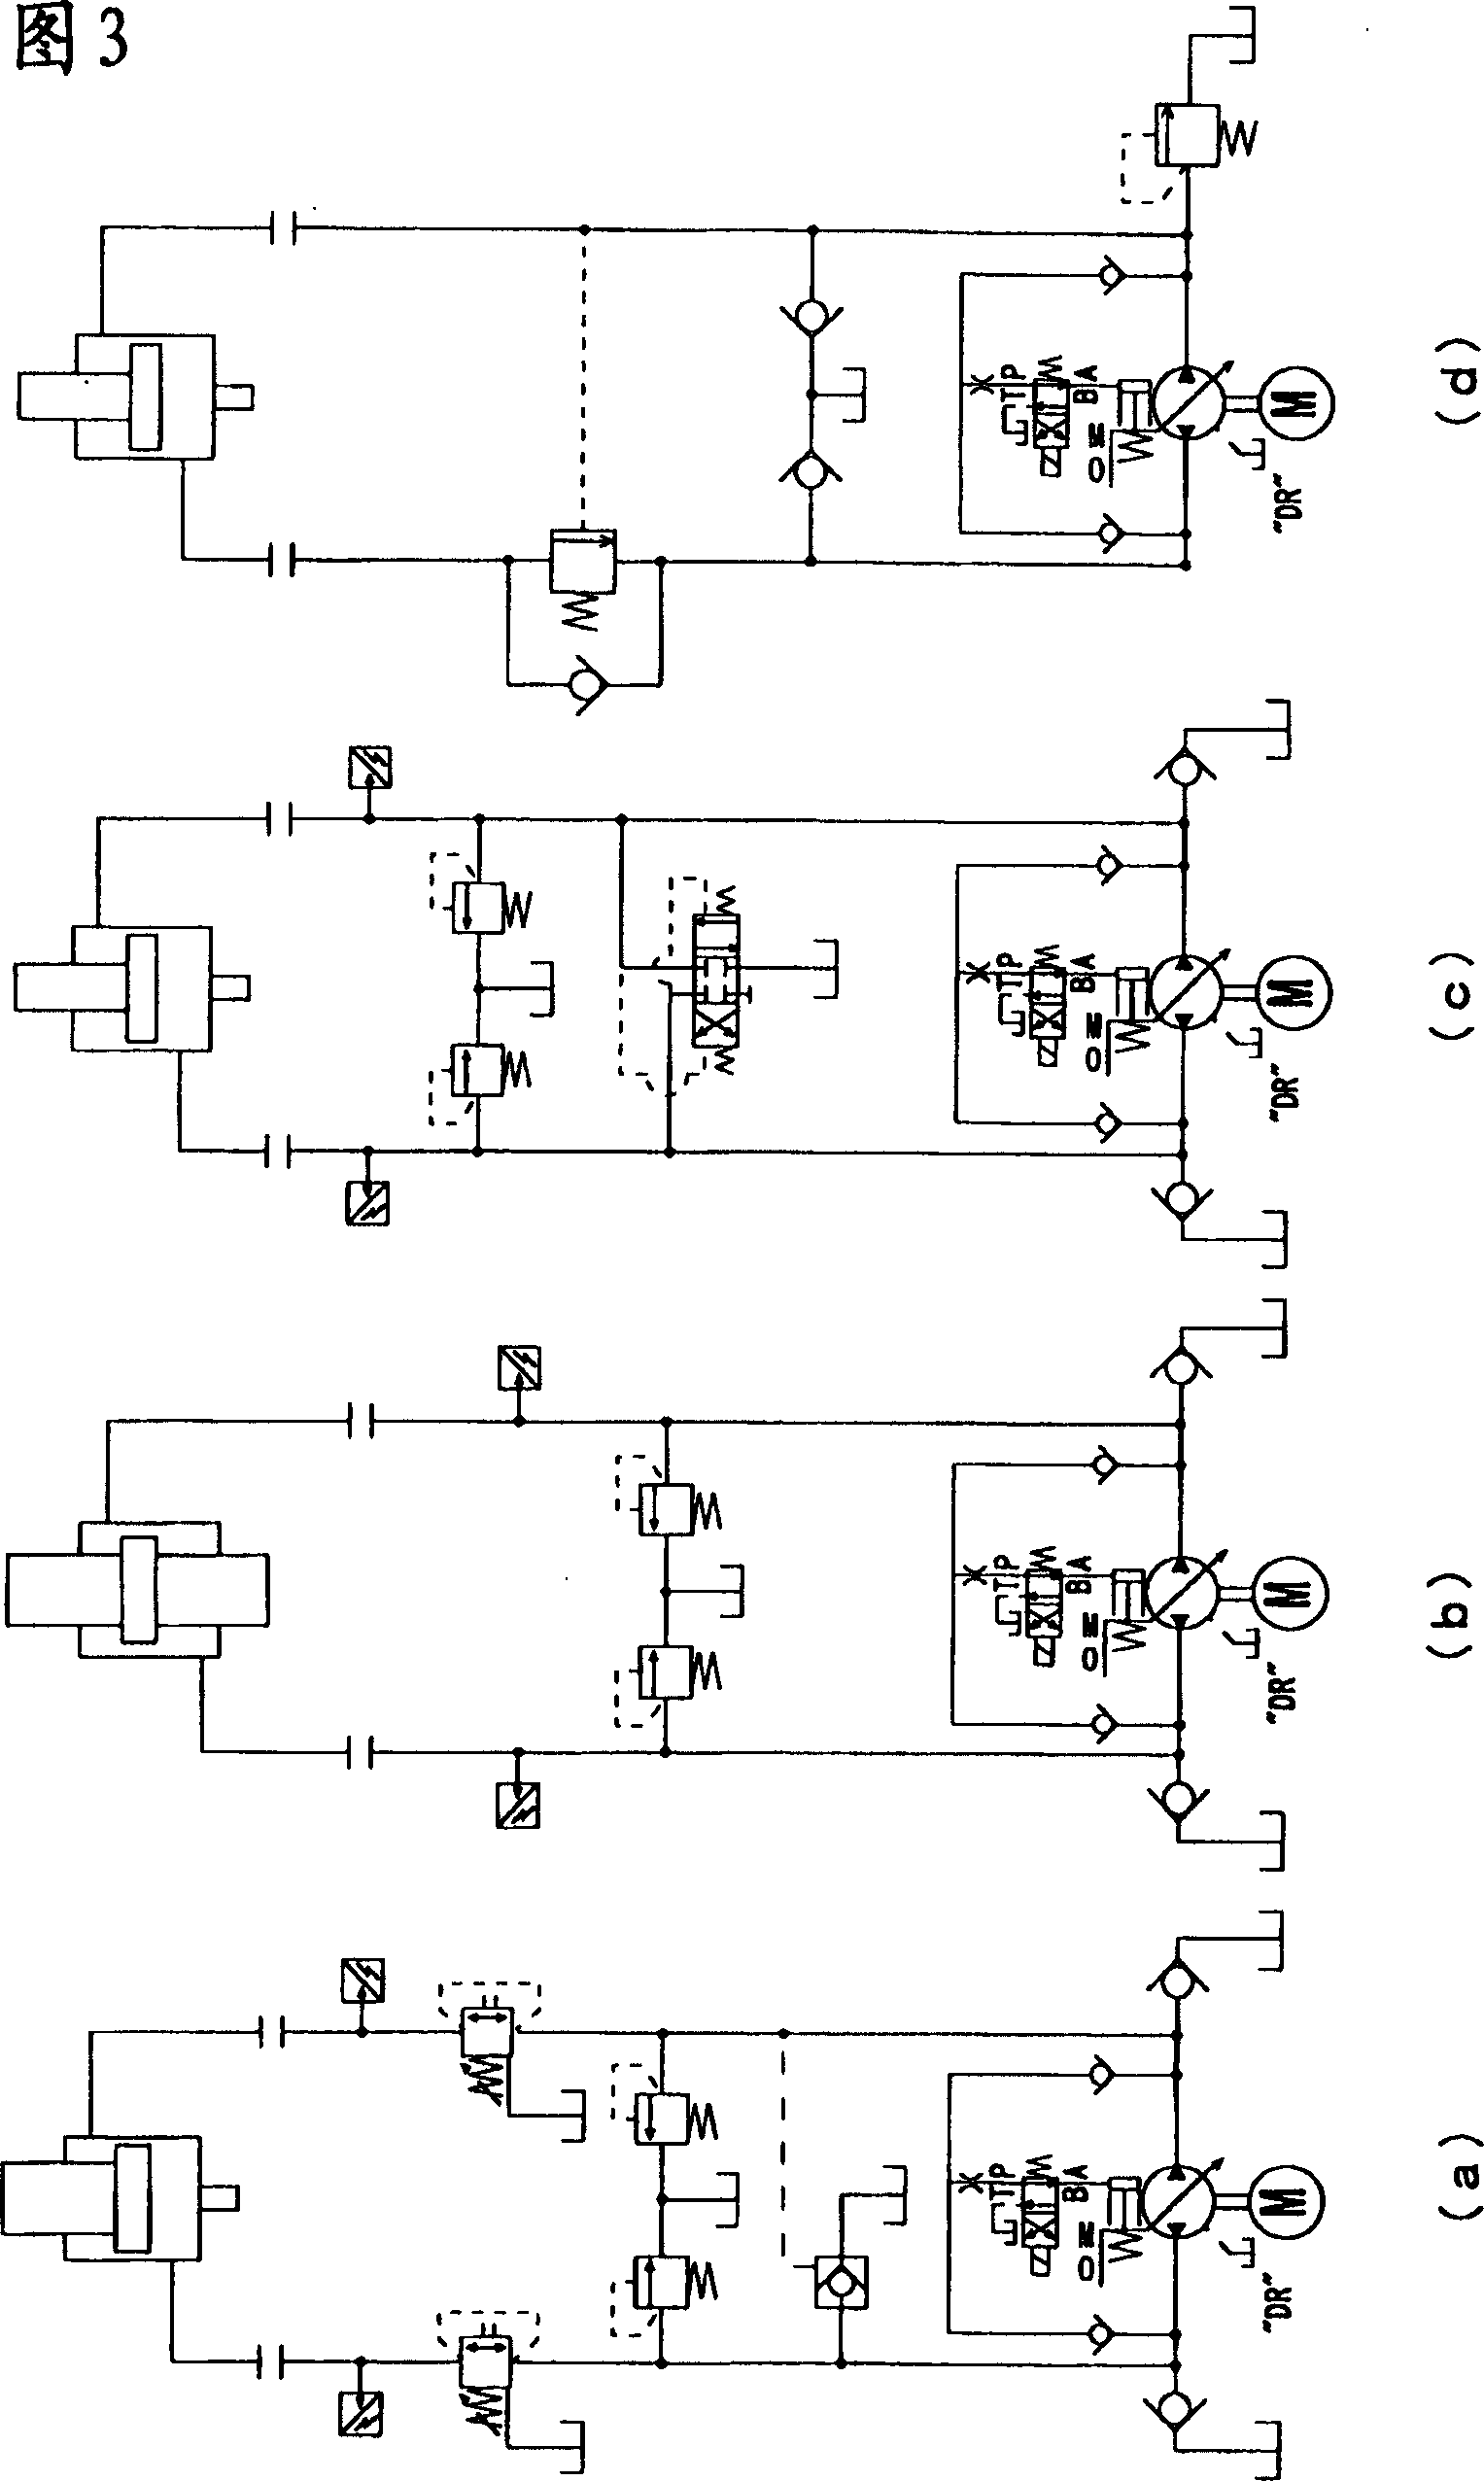 Volume-variable bi-directional rotary pump and hydraulic loop using the pump